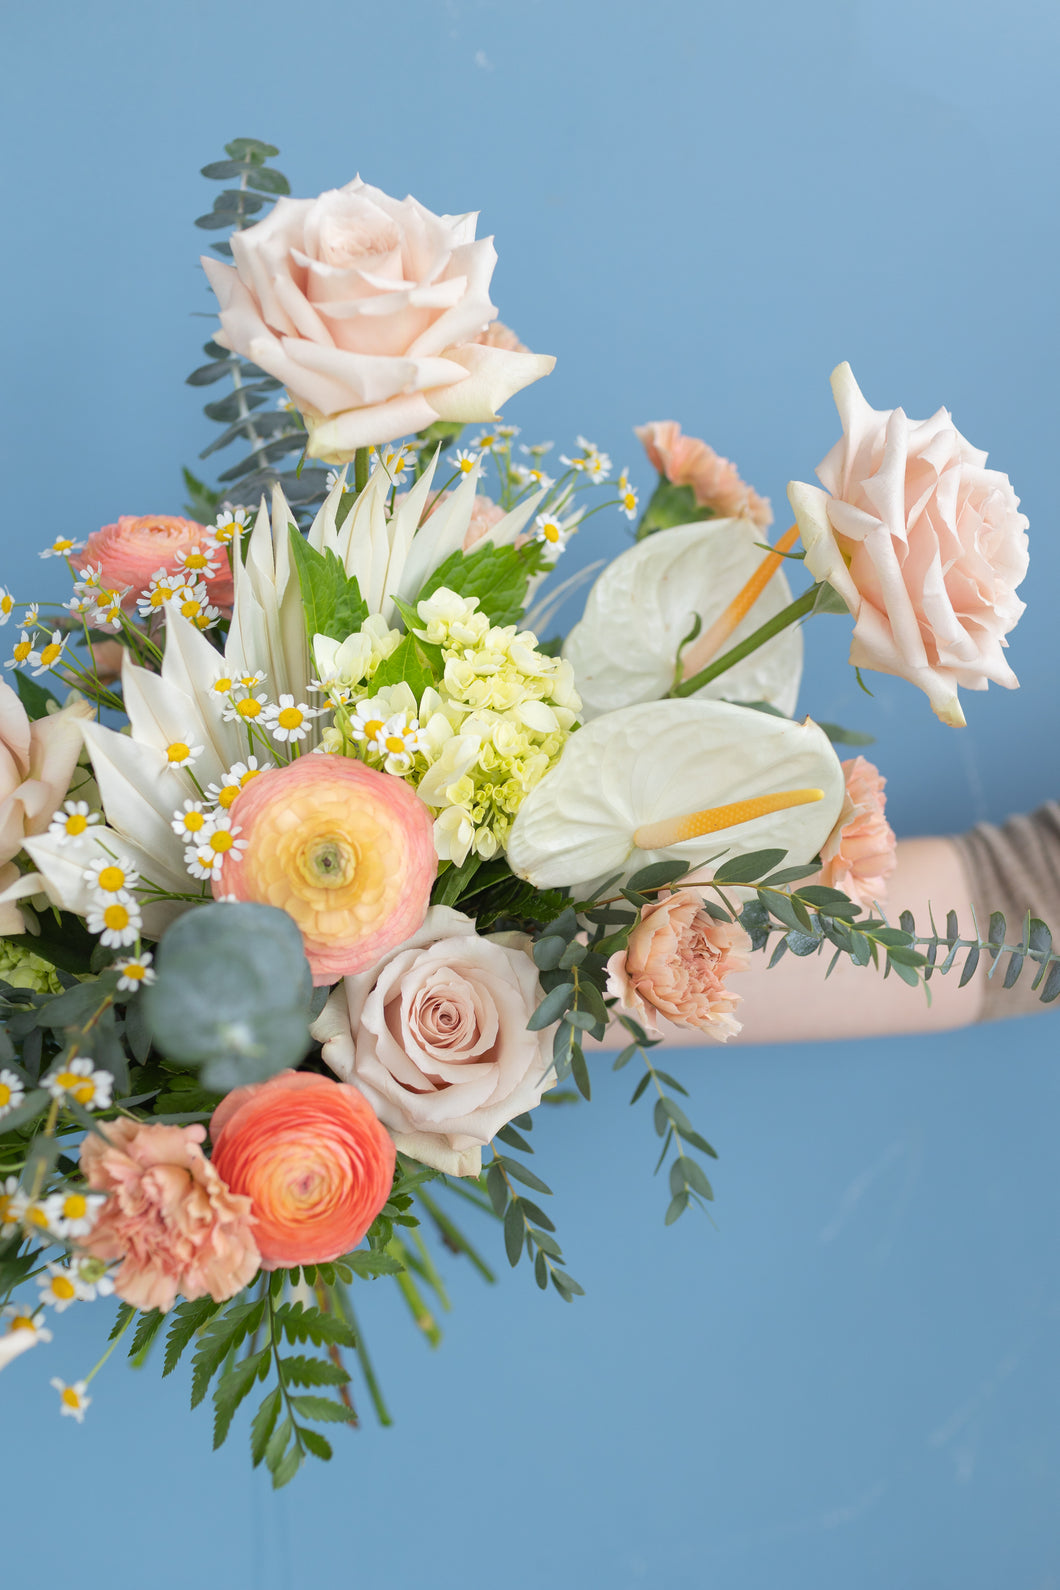 Extra Large Hand-tied Bouquet